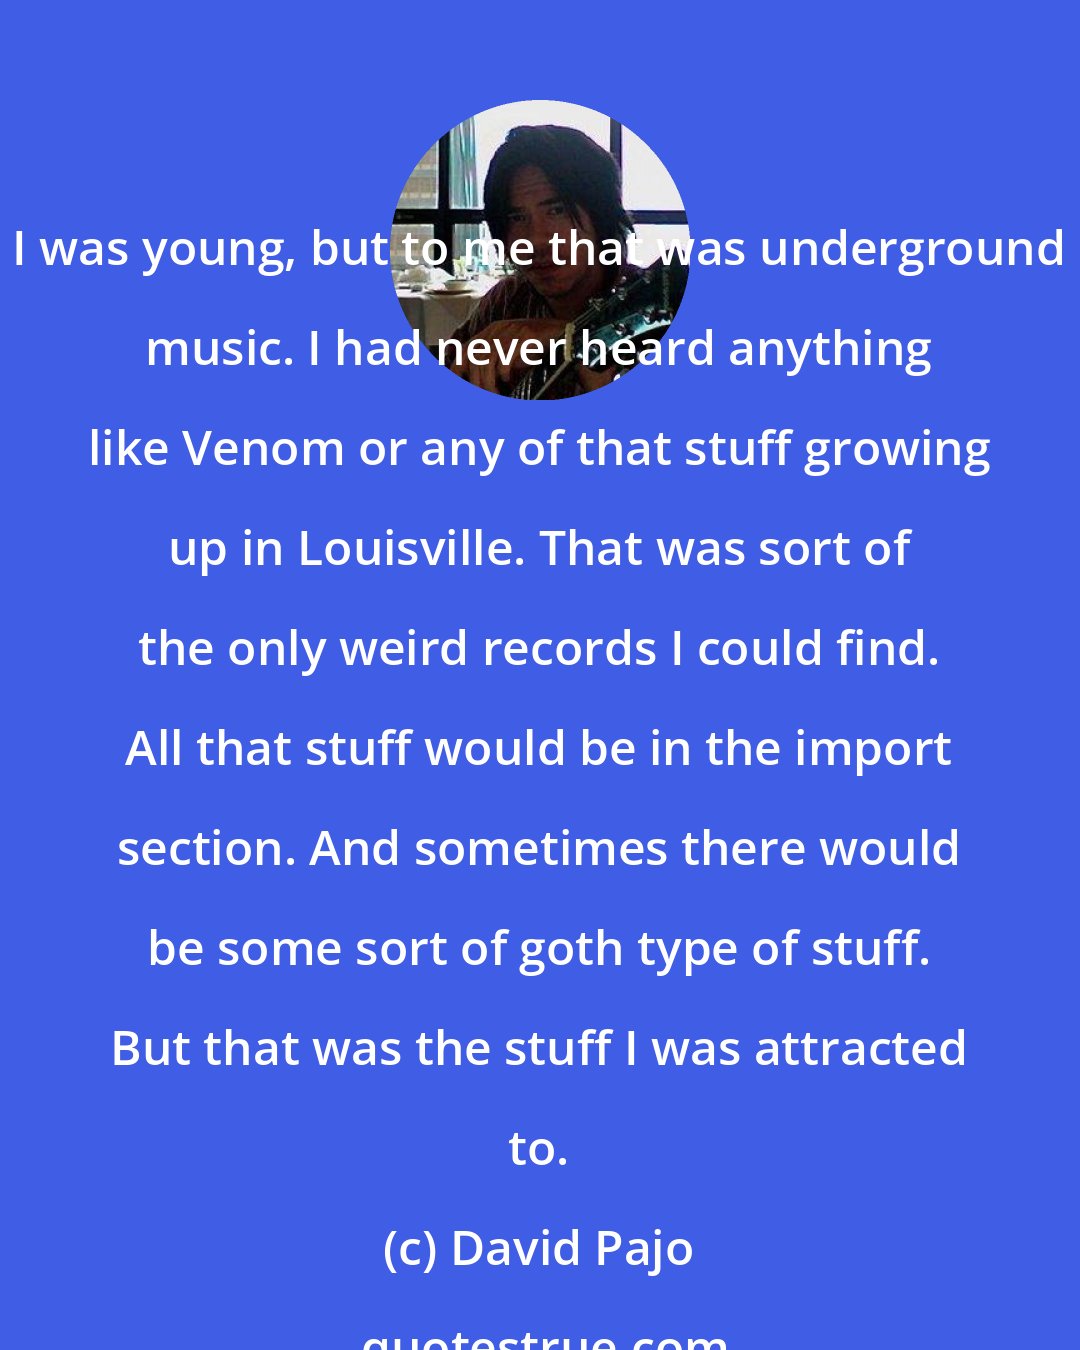 David Pajo: I was young, but to me that was underground music. I had never heard anything like Venom or any of that stuff growing up in Louisville. That was sort of the only weird records I could find. All that stuff would be in the import section. And sometimes there would be some sort of goth type of stuff. But that was the stuff I was attracted to.